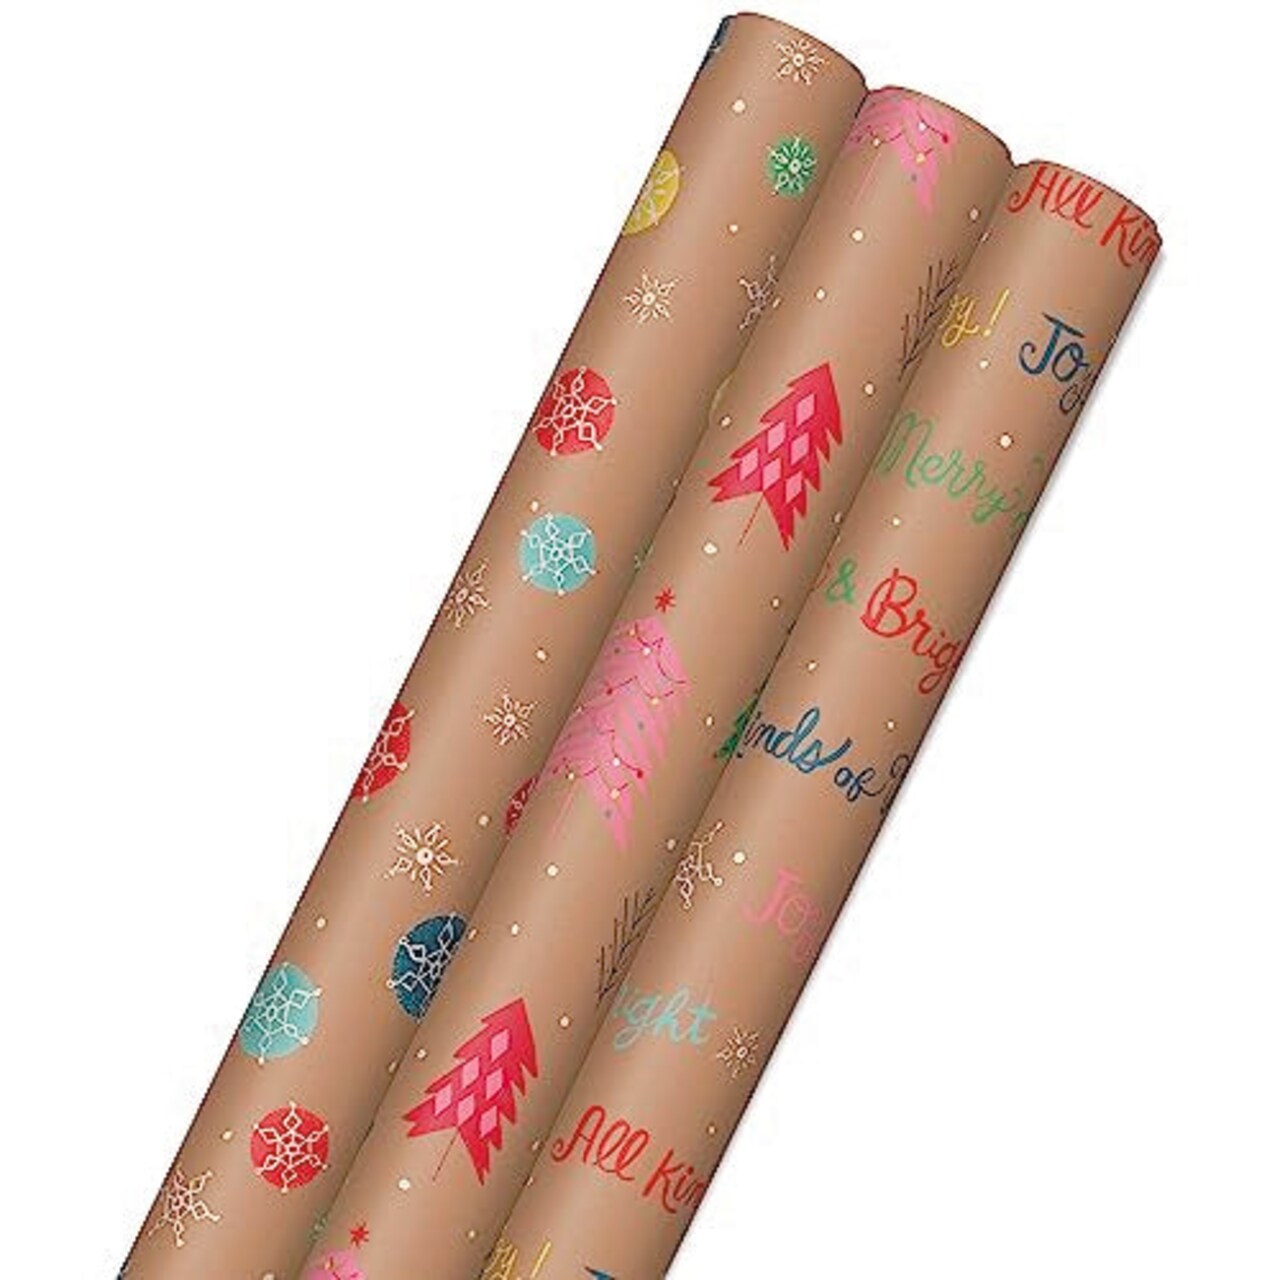 Hallmark Colorful Recyclable Christmas Wrapping Paper with Cut Lines on  Reverse (3 Rolls: 90 sq. ft. ttl) Kraft Brown with Snowflakes, Pink Trees,  All Kinds of Merry